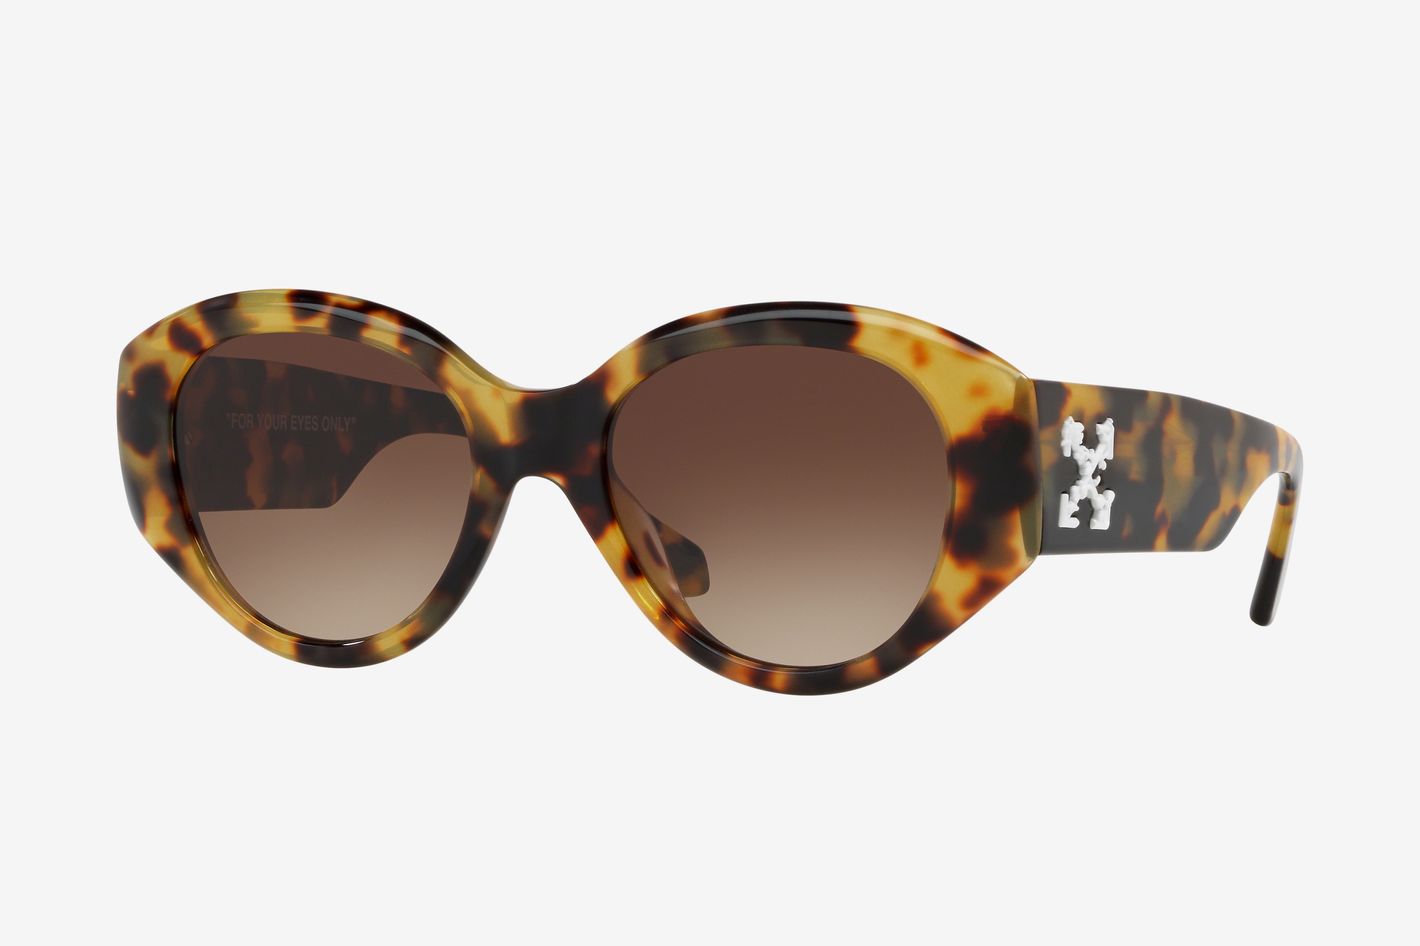 Sunglass Hut - Introducing our capsule collection Off-White™ X